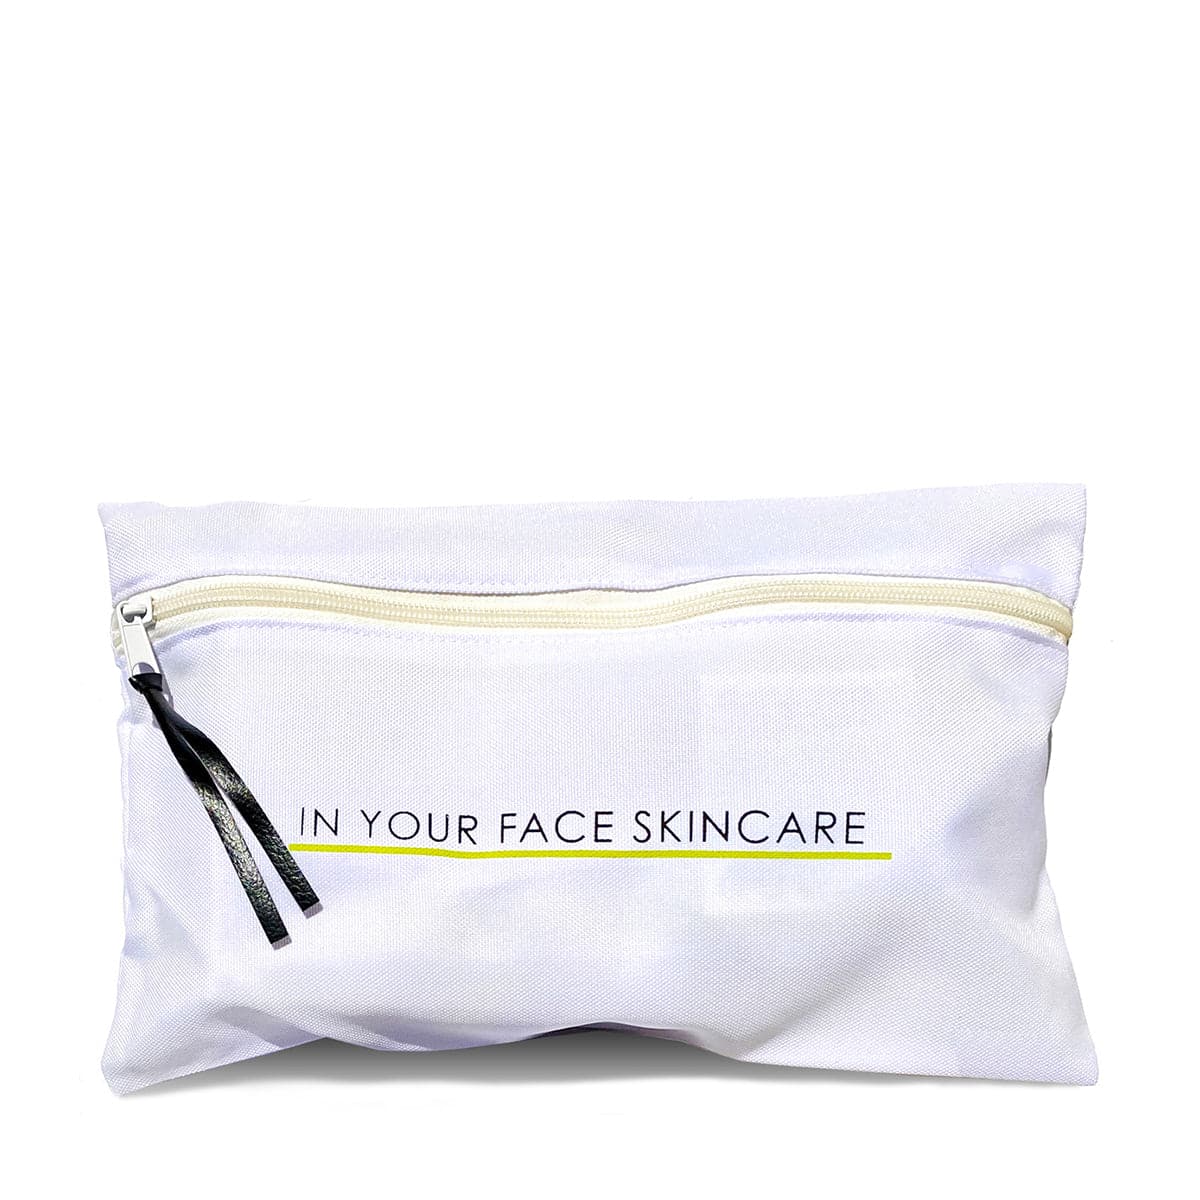 an image of IN YOUR FACE MAKEUP BAG on a white background